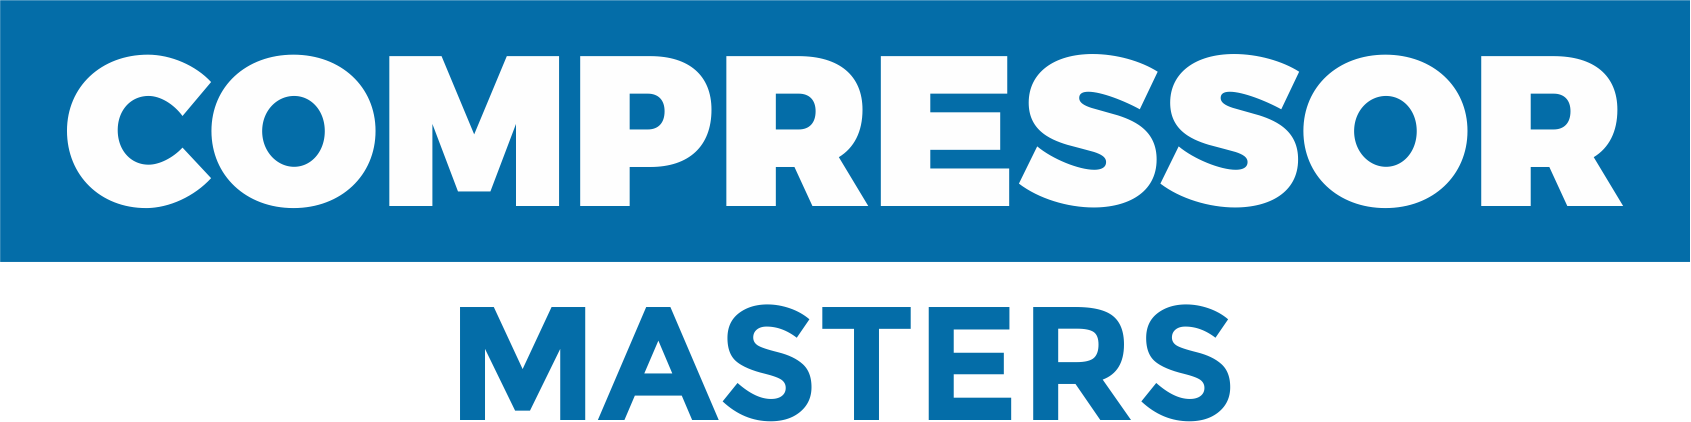 Compressor Masters, Find the right air compressor for your application, buy air compressors online, Delivery from India for small to big air compressors, Buy new and used air compressors, pre owned air compressors, sell you used old preowned air compressor, post a free advertisement to sell your used preowned or old air compressor